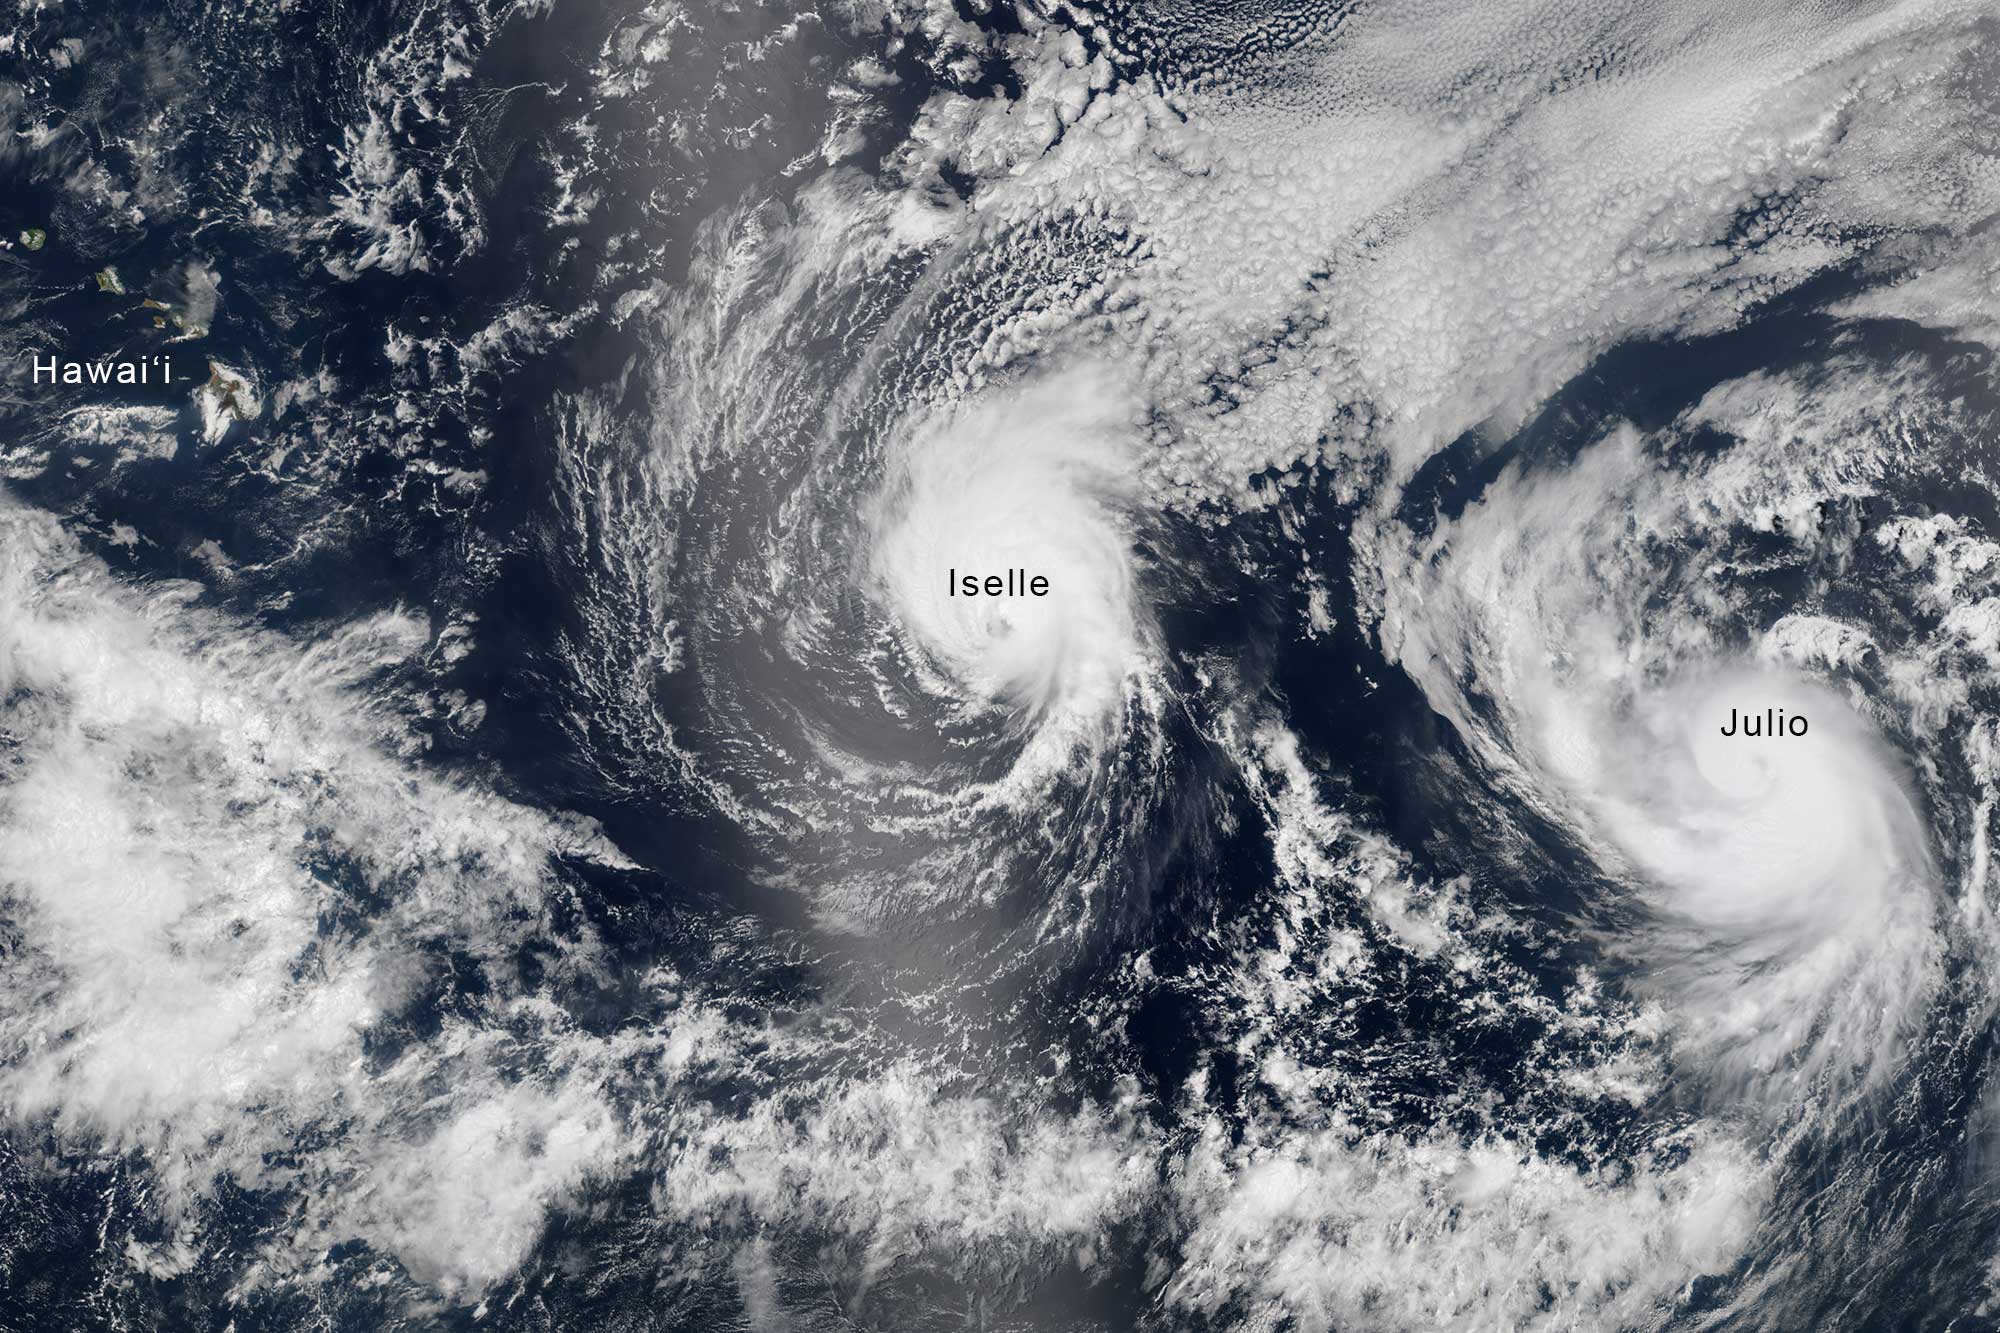 Satellite image of Hurricanes Iselle and Julio on the way to Hawaii on August 5, 2014.